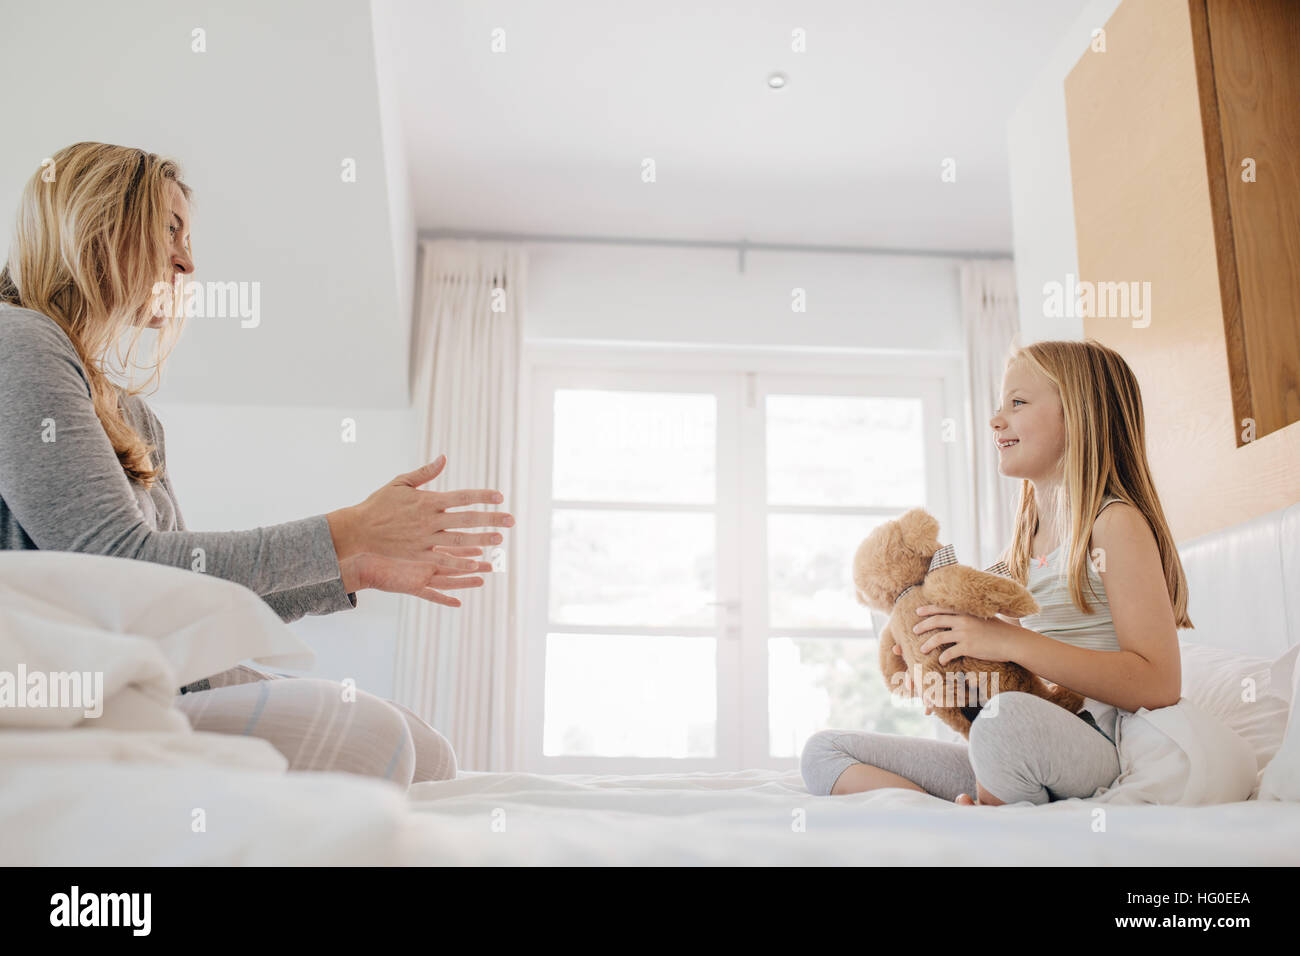 Shot of little girl and woman playing with teddy bear. Mother and daughter playing with teddy bear on bed at home. Stock Photo